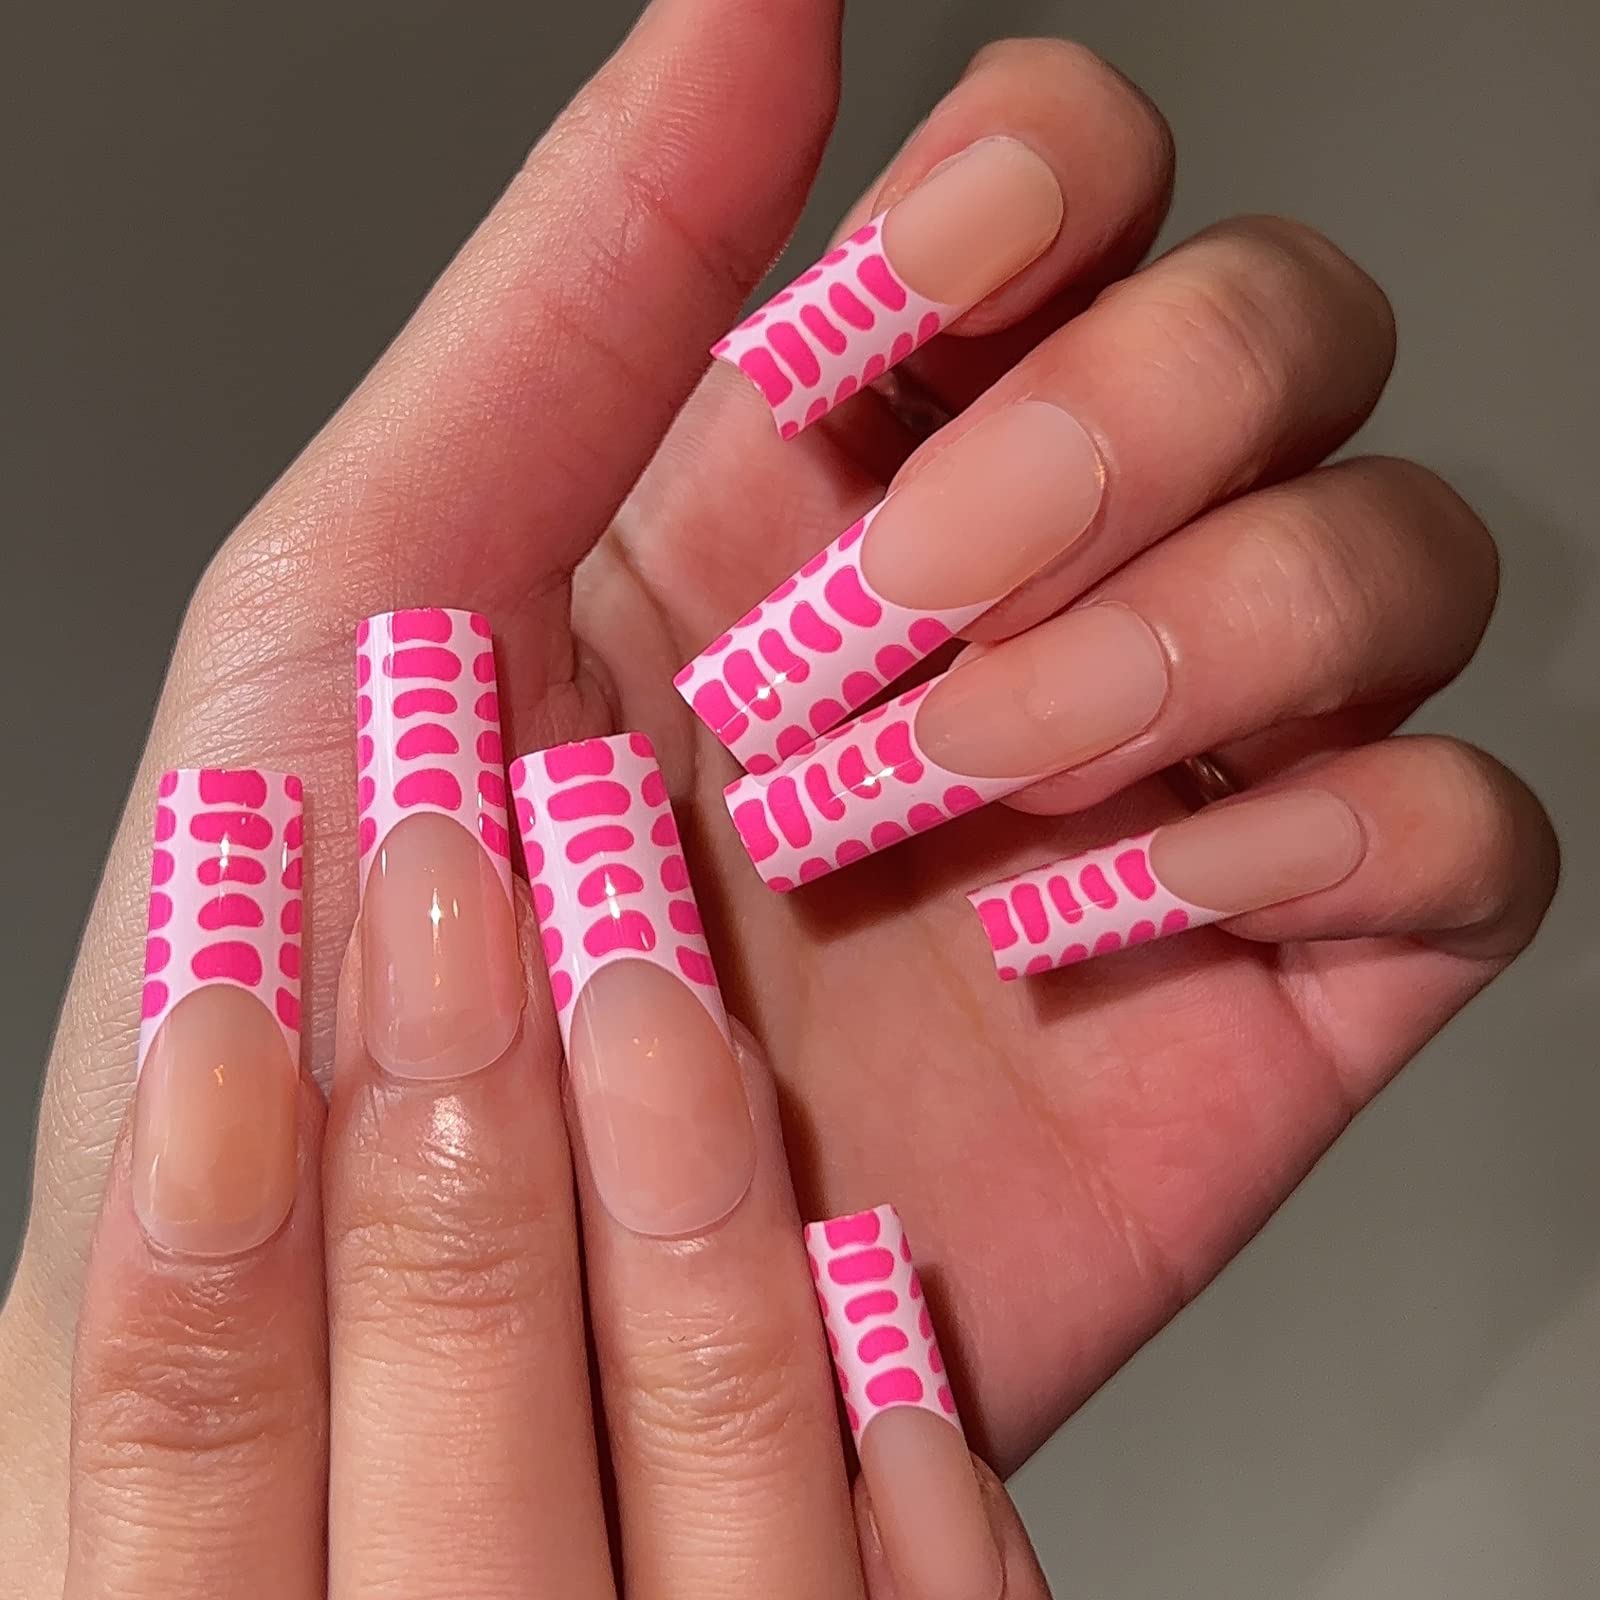 DIY French Manicure Hacks You Need To Try Now |